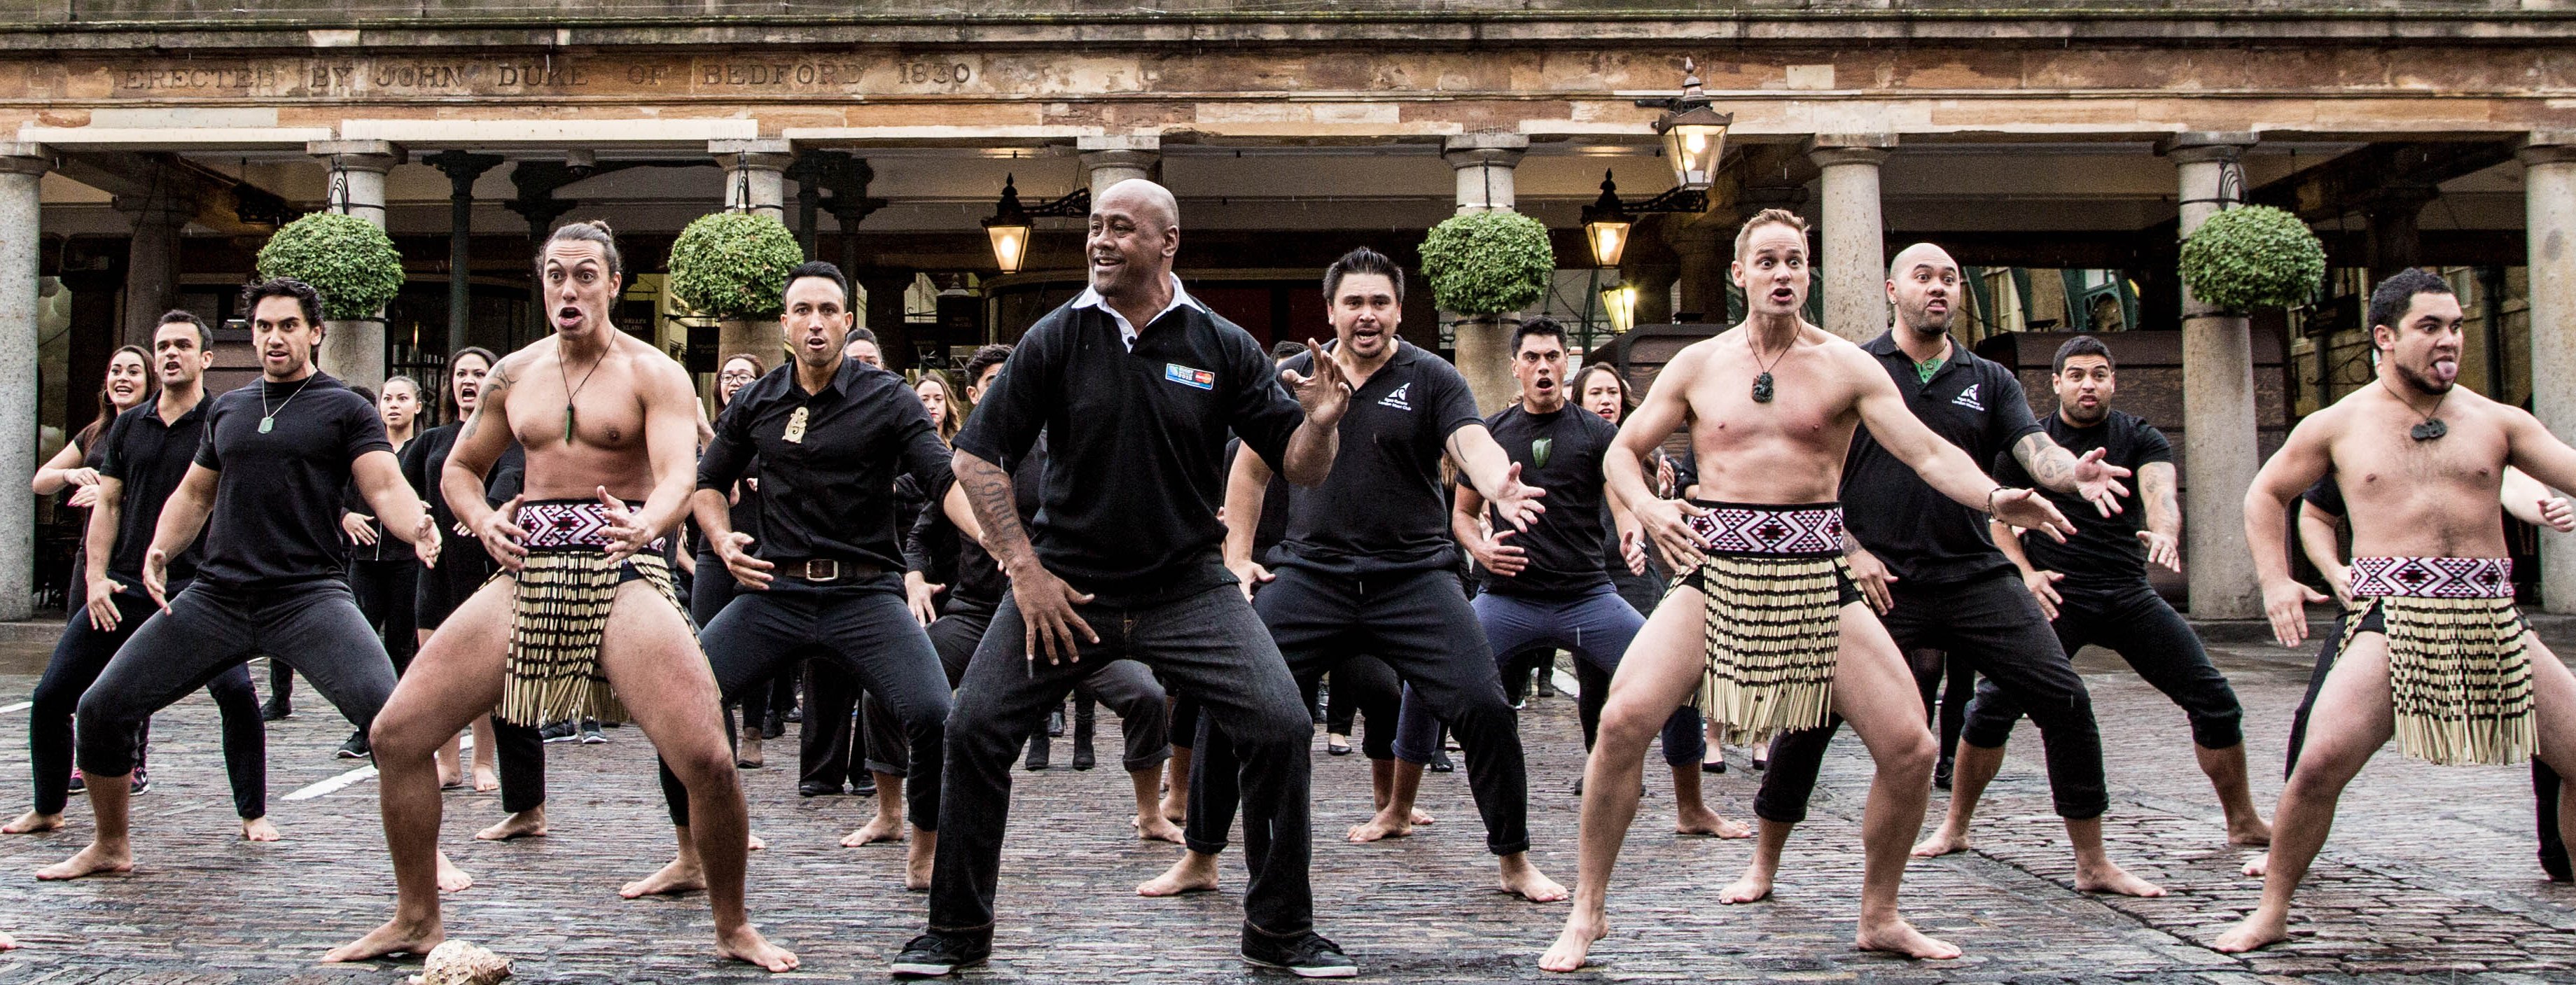 MasterCard Rugby World Cup 2015 ambassador Jonah Lomu, accompanied by Londoners and the Ngāti Rānana London Māori Club performed a Priceless haka in Covent Garden, London.